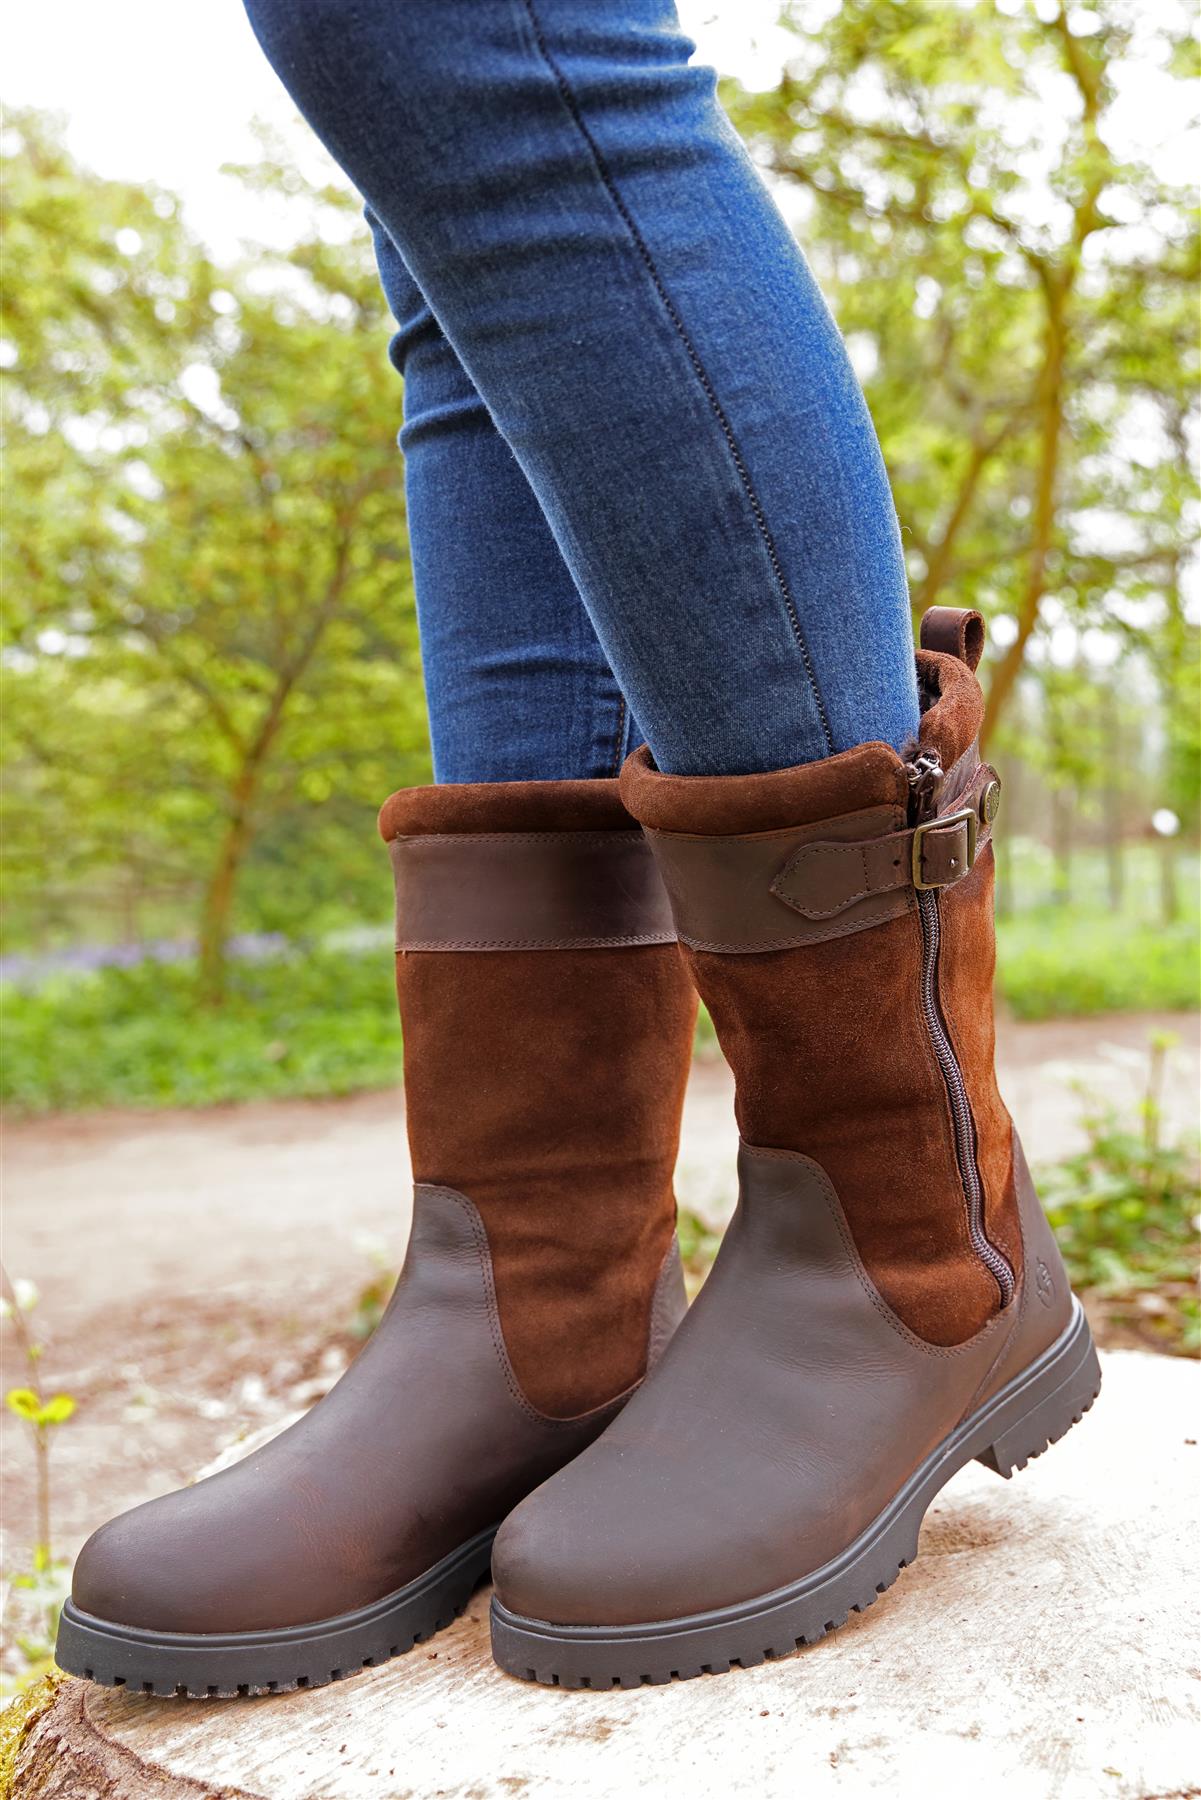 Moretta Savona Country Boots - Just Horse Riders